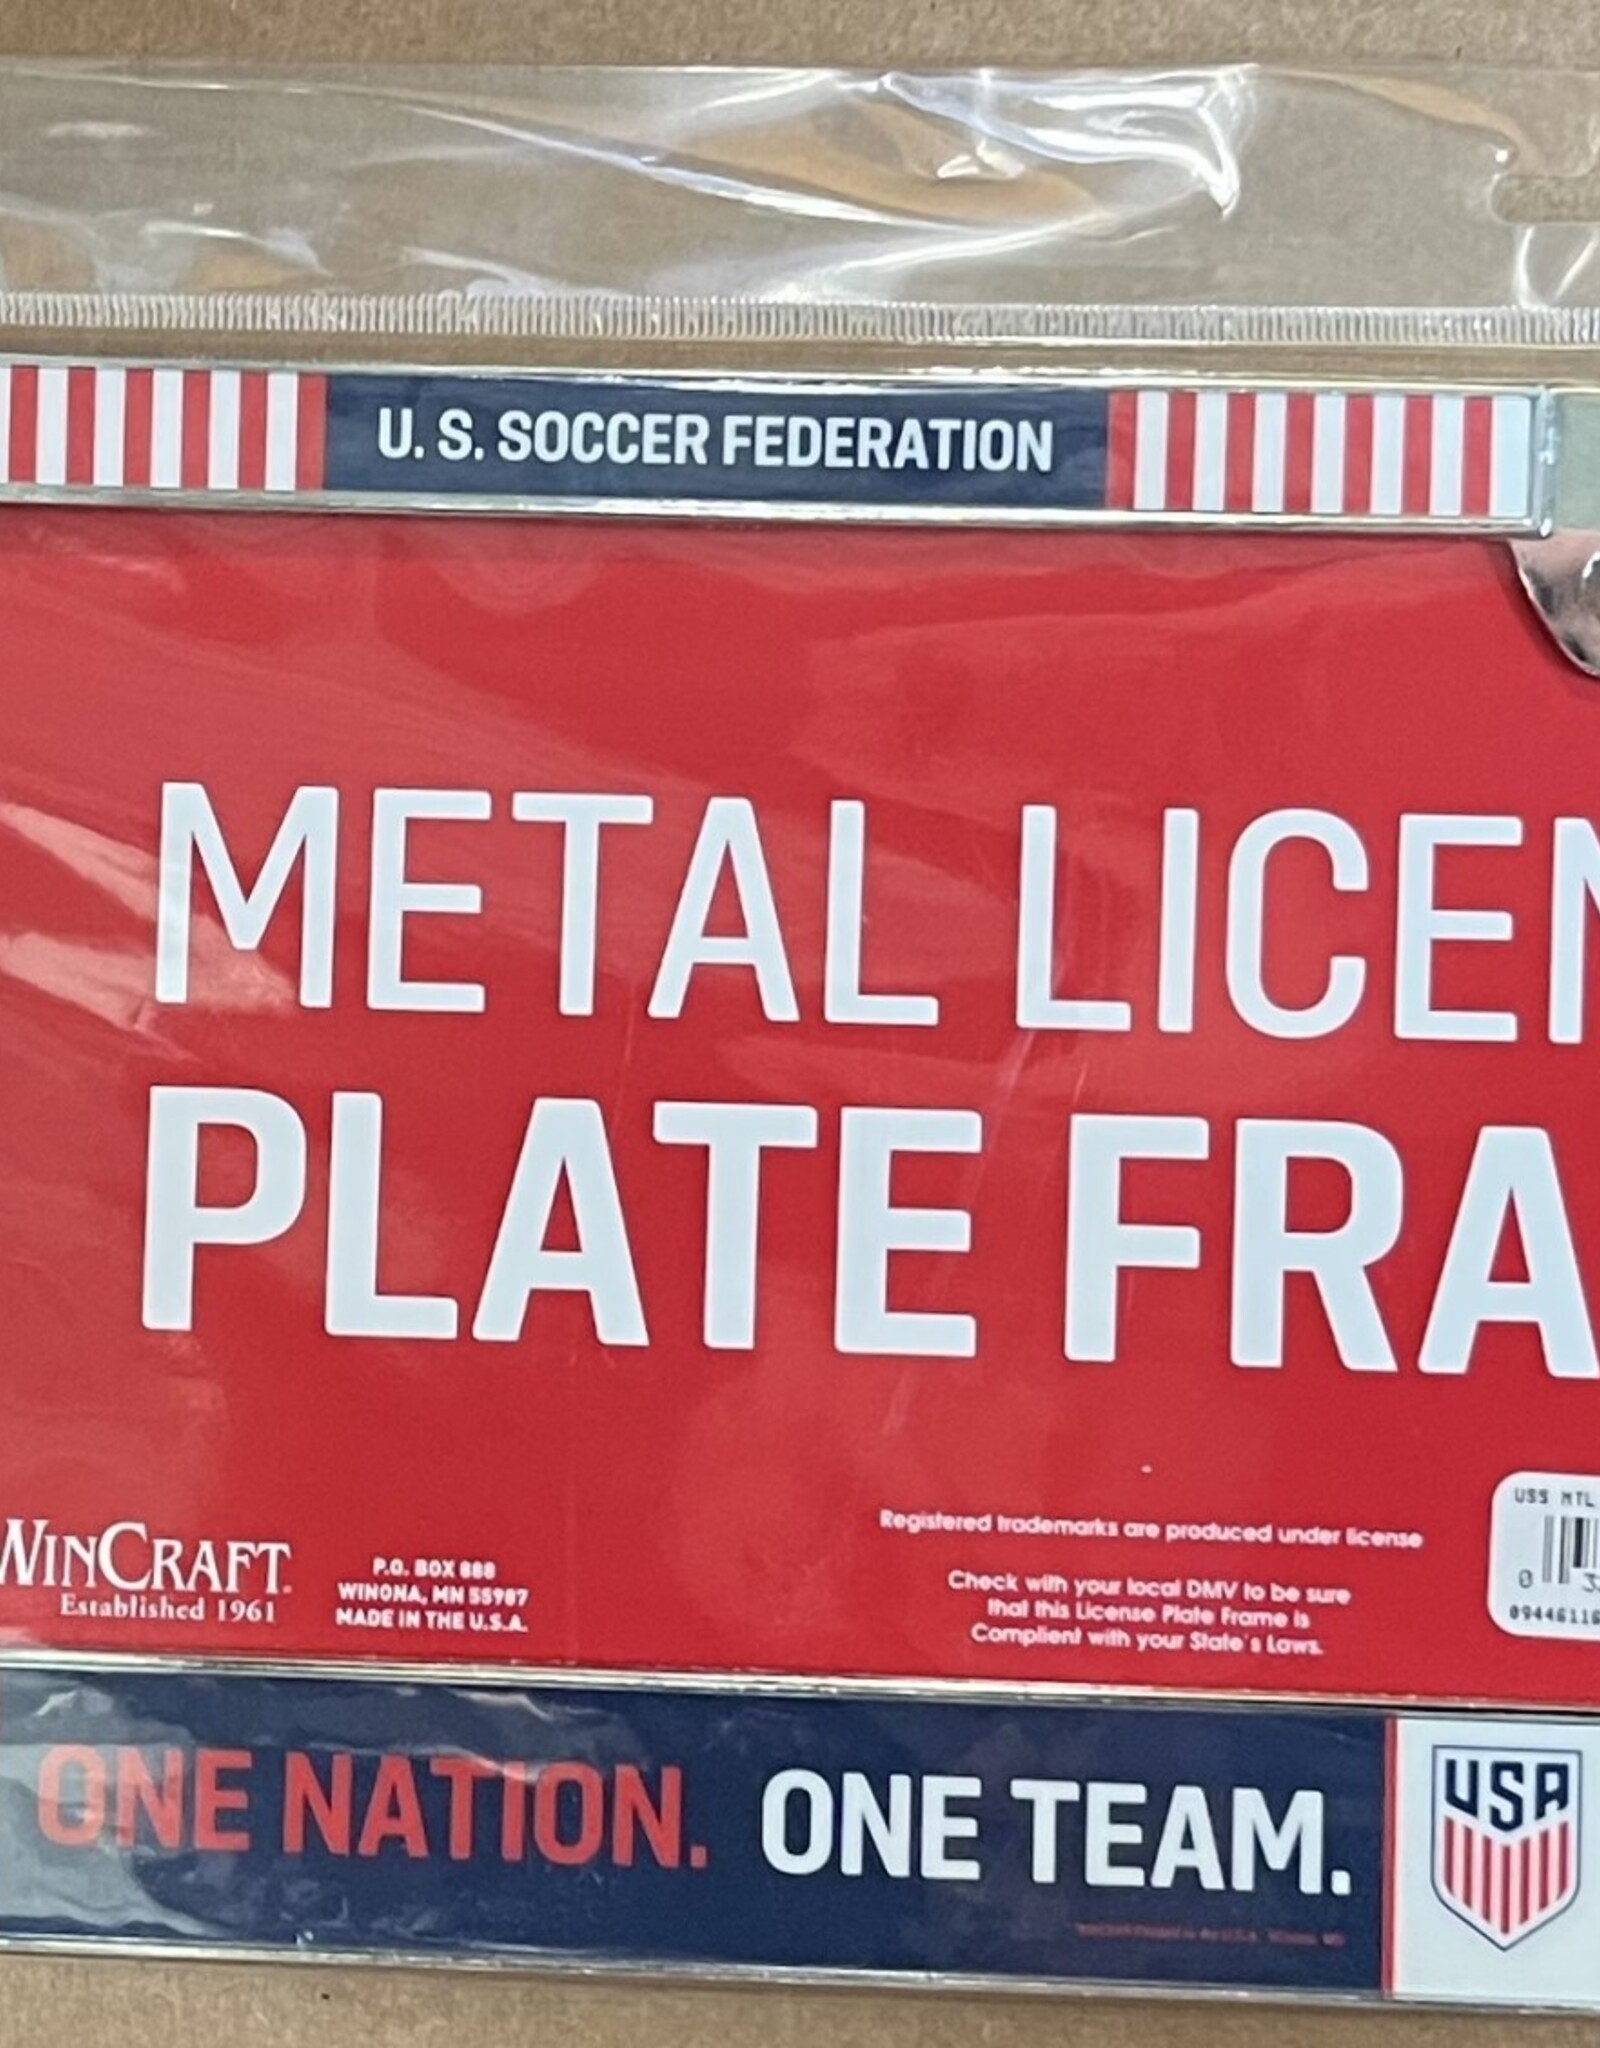 USA One Nation One Team Metal License Plate Frame - Red